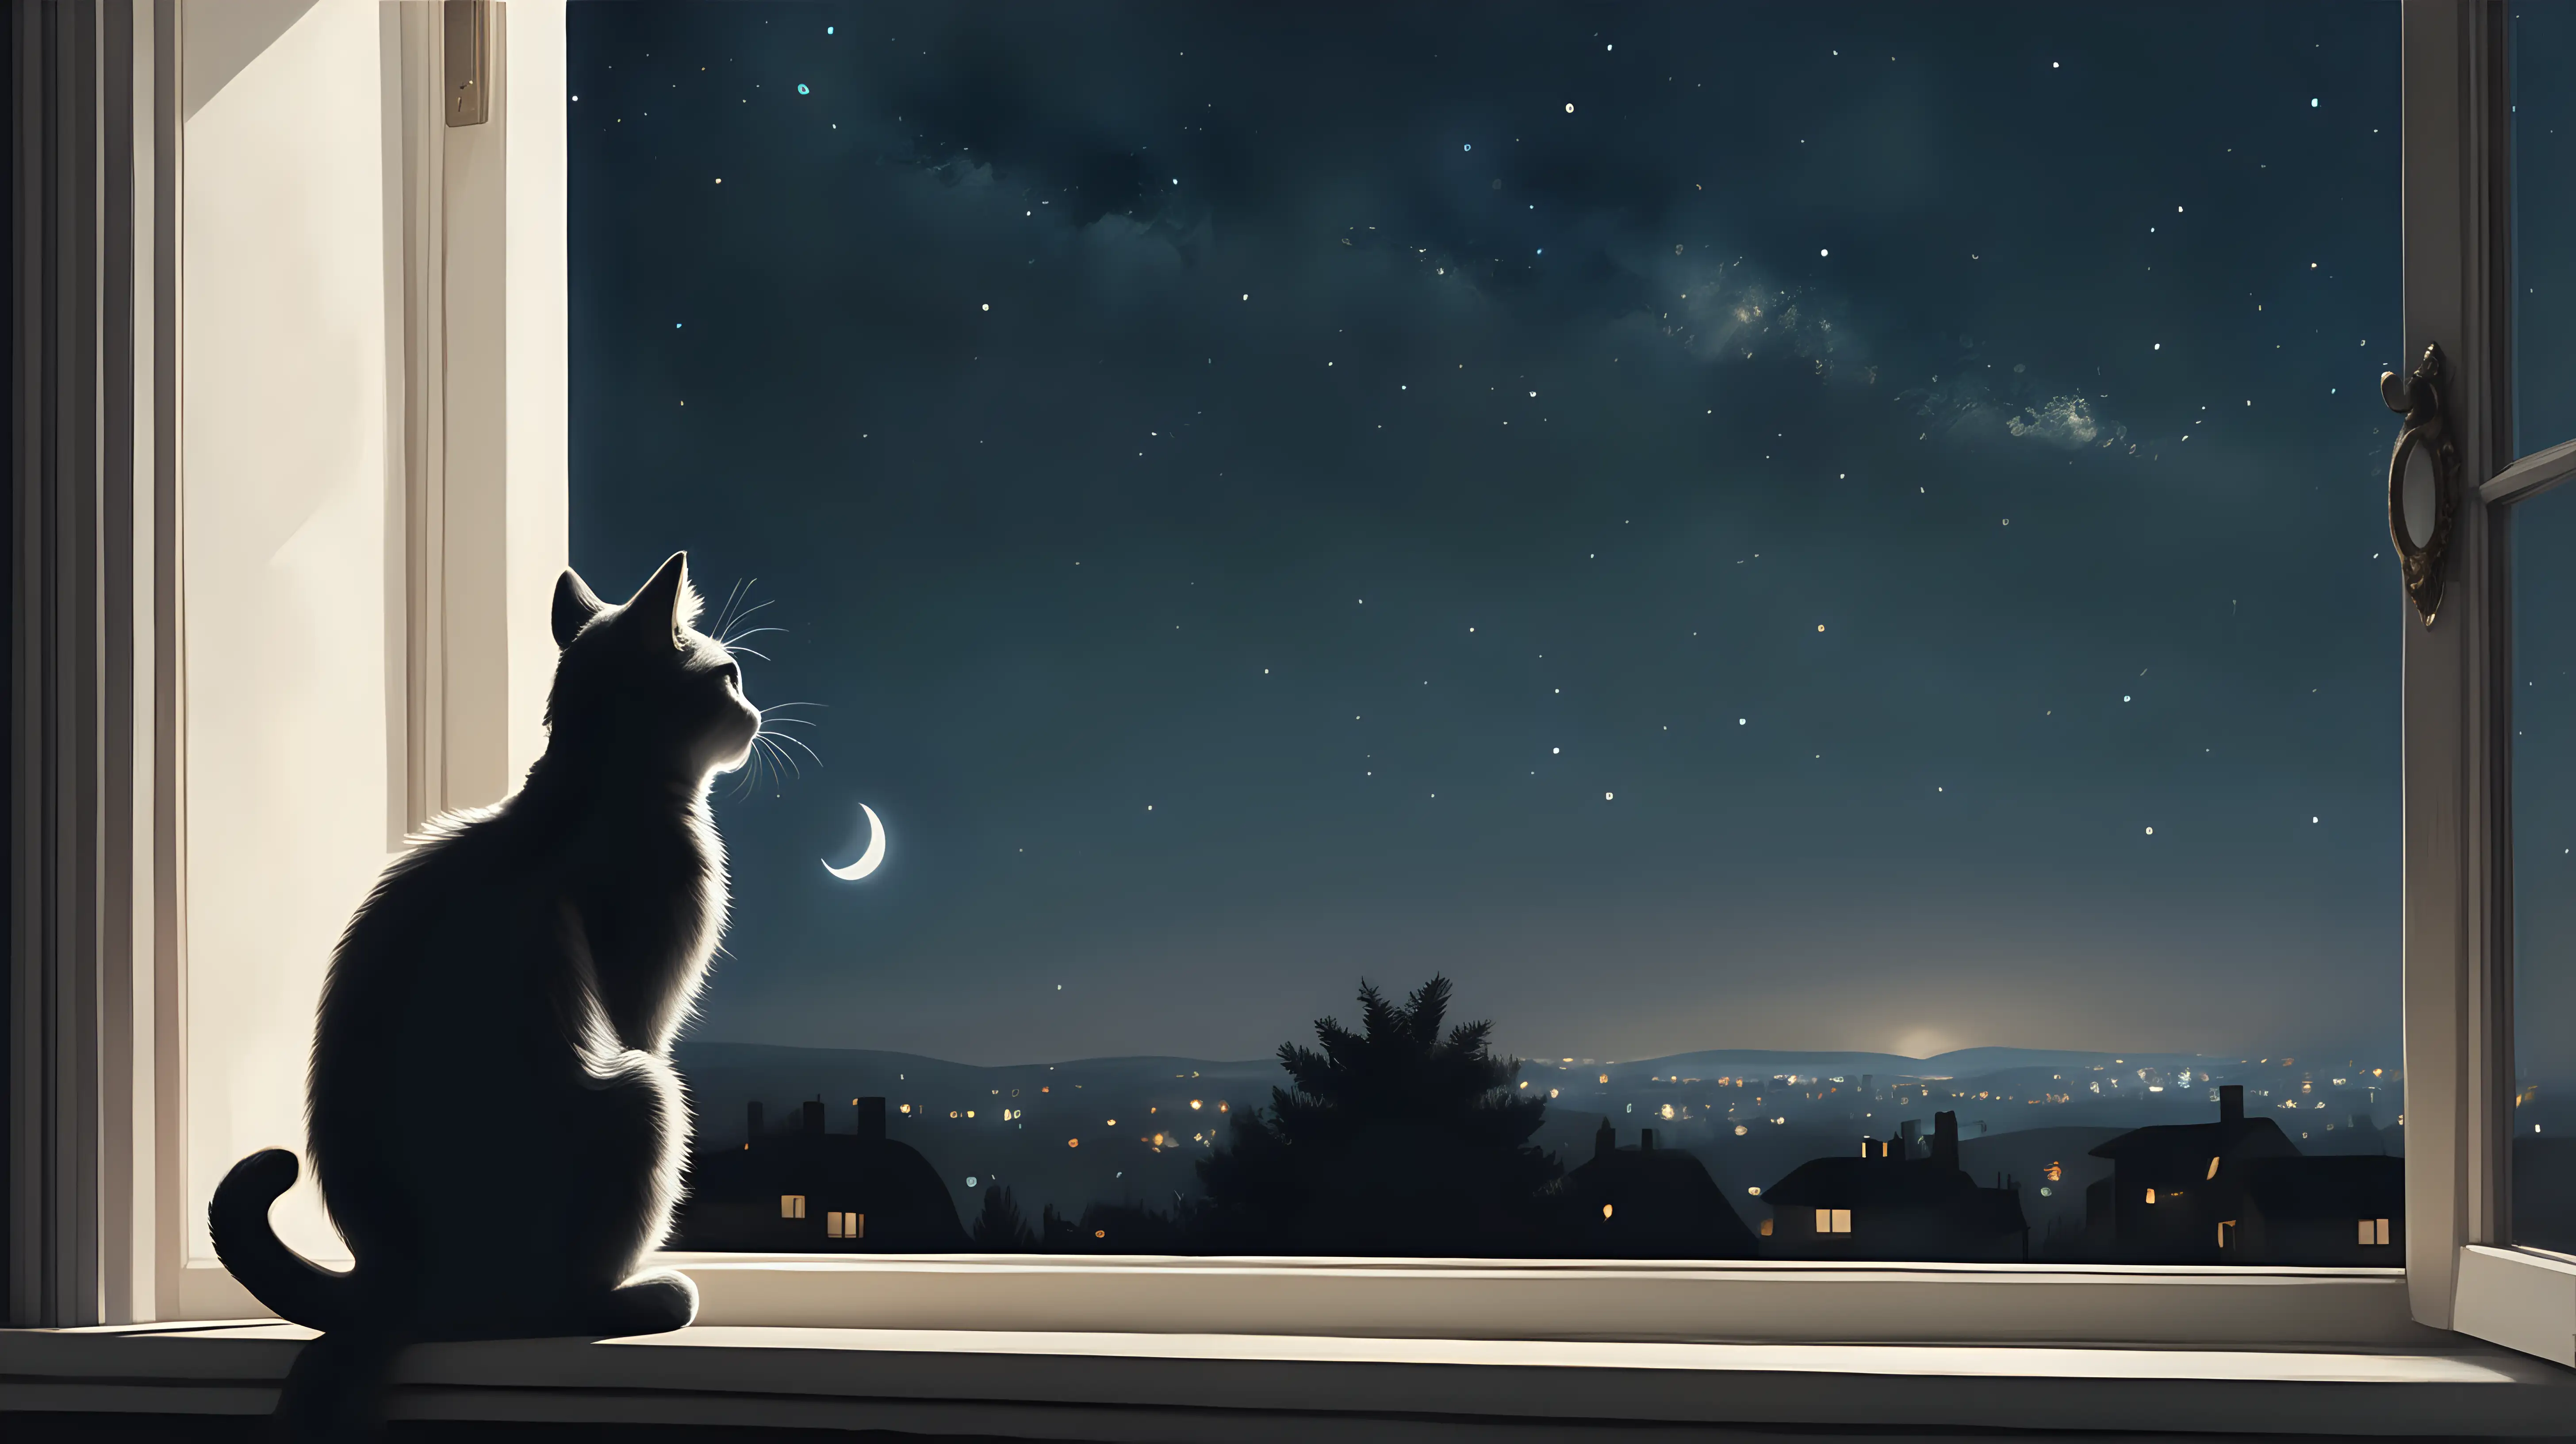 "Create a scene of a cat sitting at the edge of an open window, looking out into the night sky, with a sense of yearning for something beyond its reach."